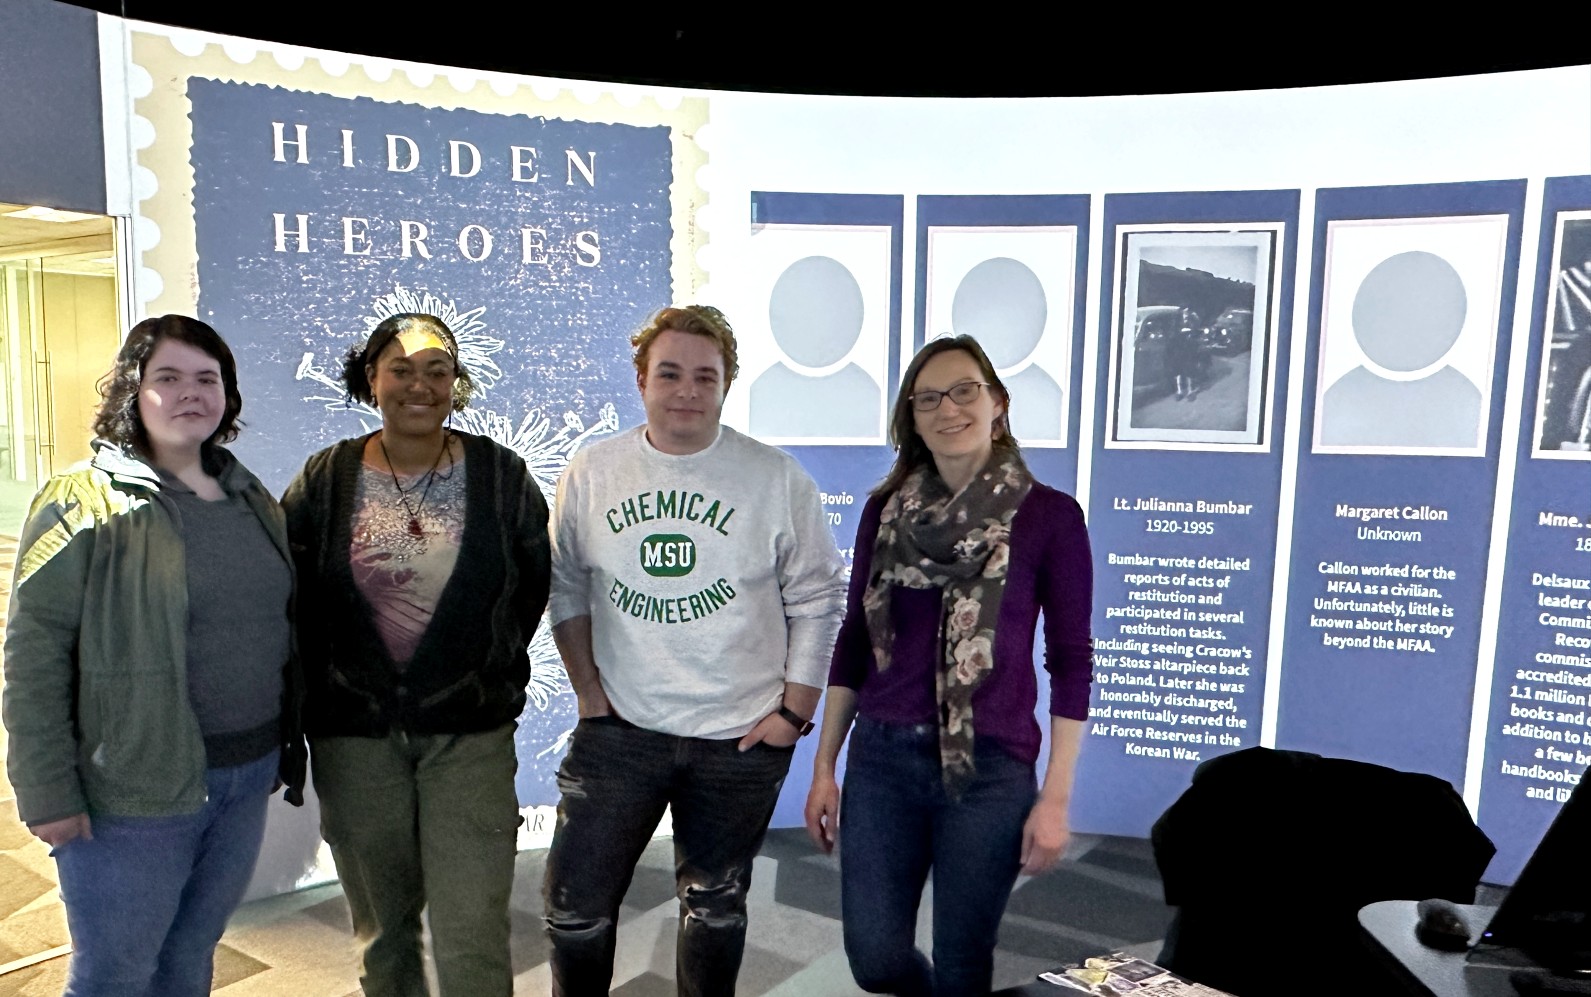 Oliviah Brown, Taylor Hughes-Barrow, Michael Griffin, and Kristen Mapes in front of the projection of their Hidden Heroes work.